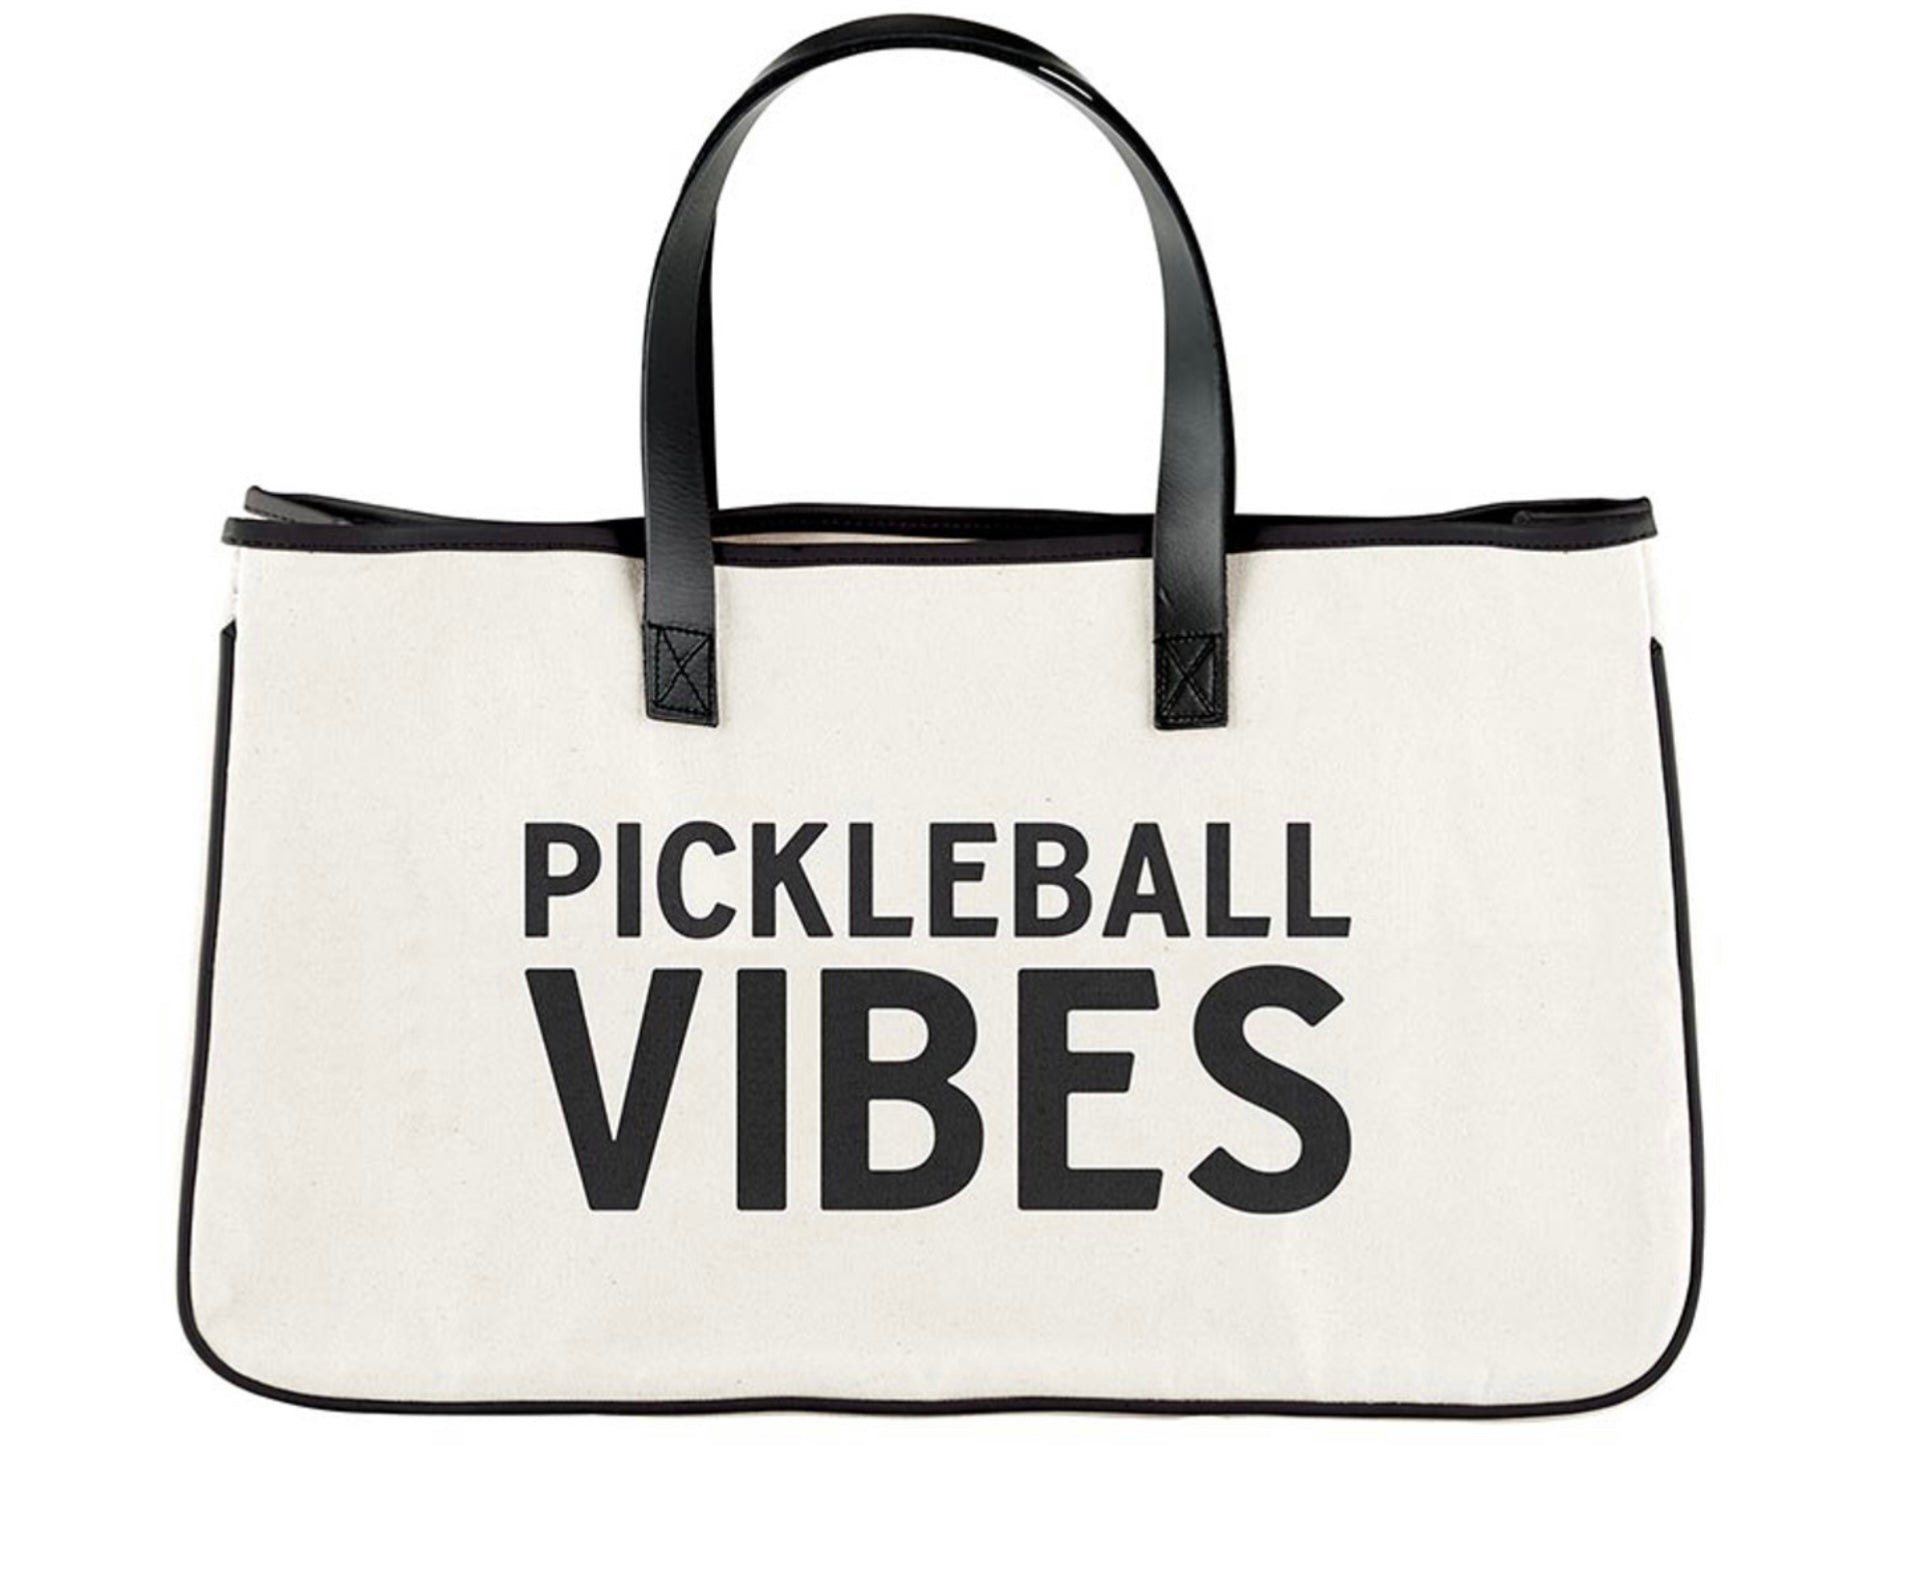 Canvas Tote - Pickleball Vibes